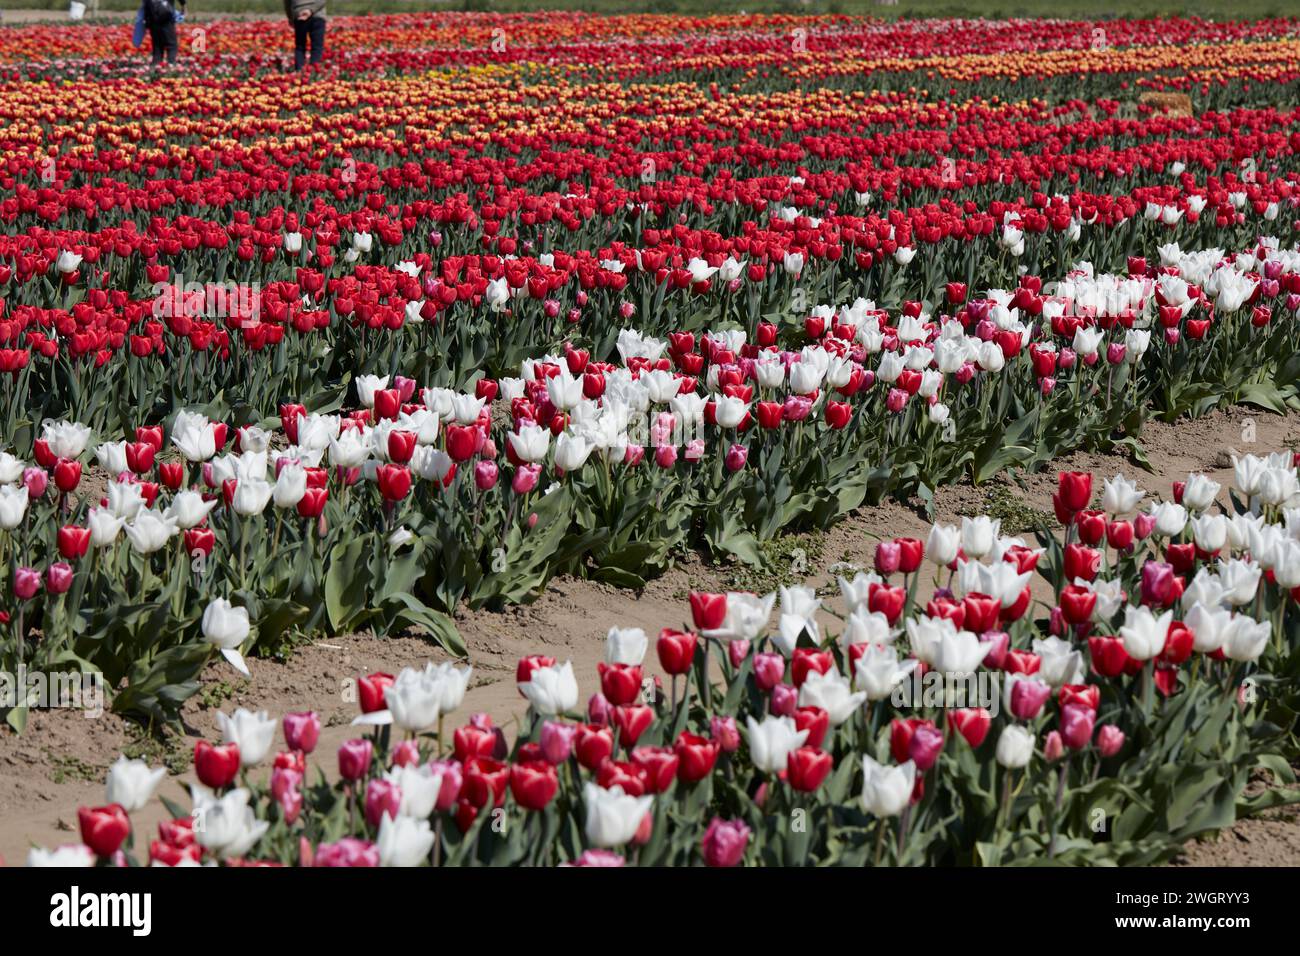 Tulip field with flowers in white, red, purple, yellow colors and people in spring sunlight Stock Photo